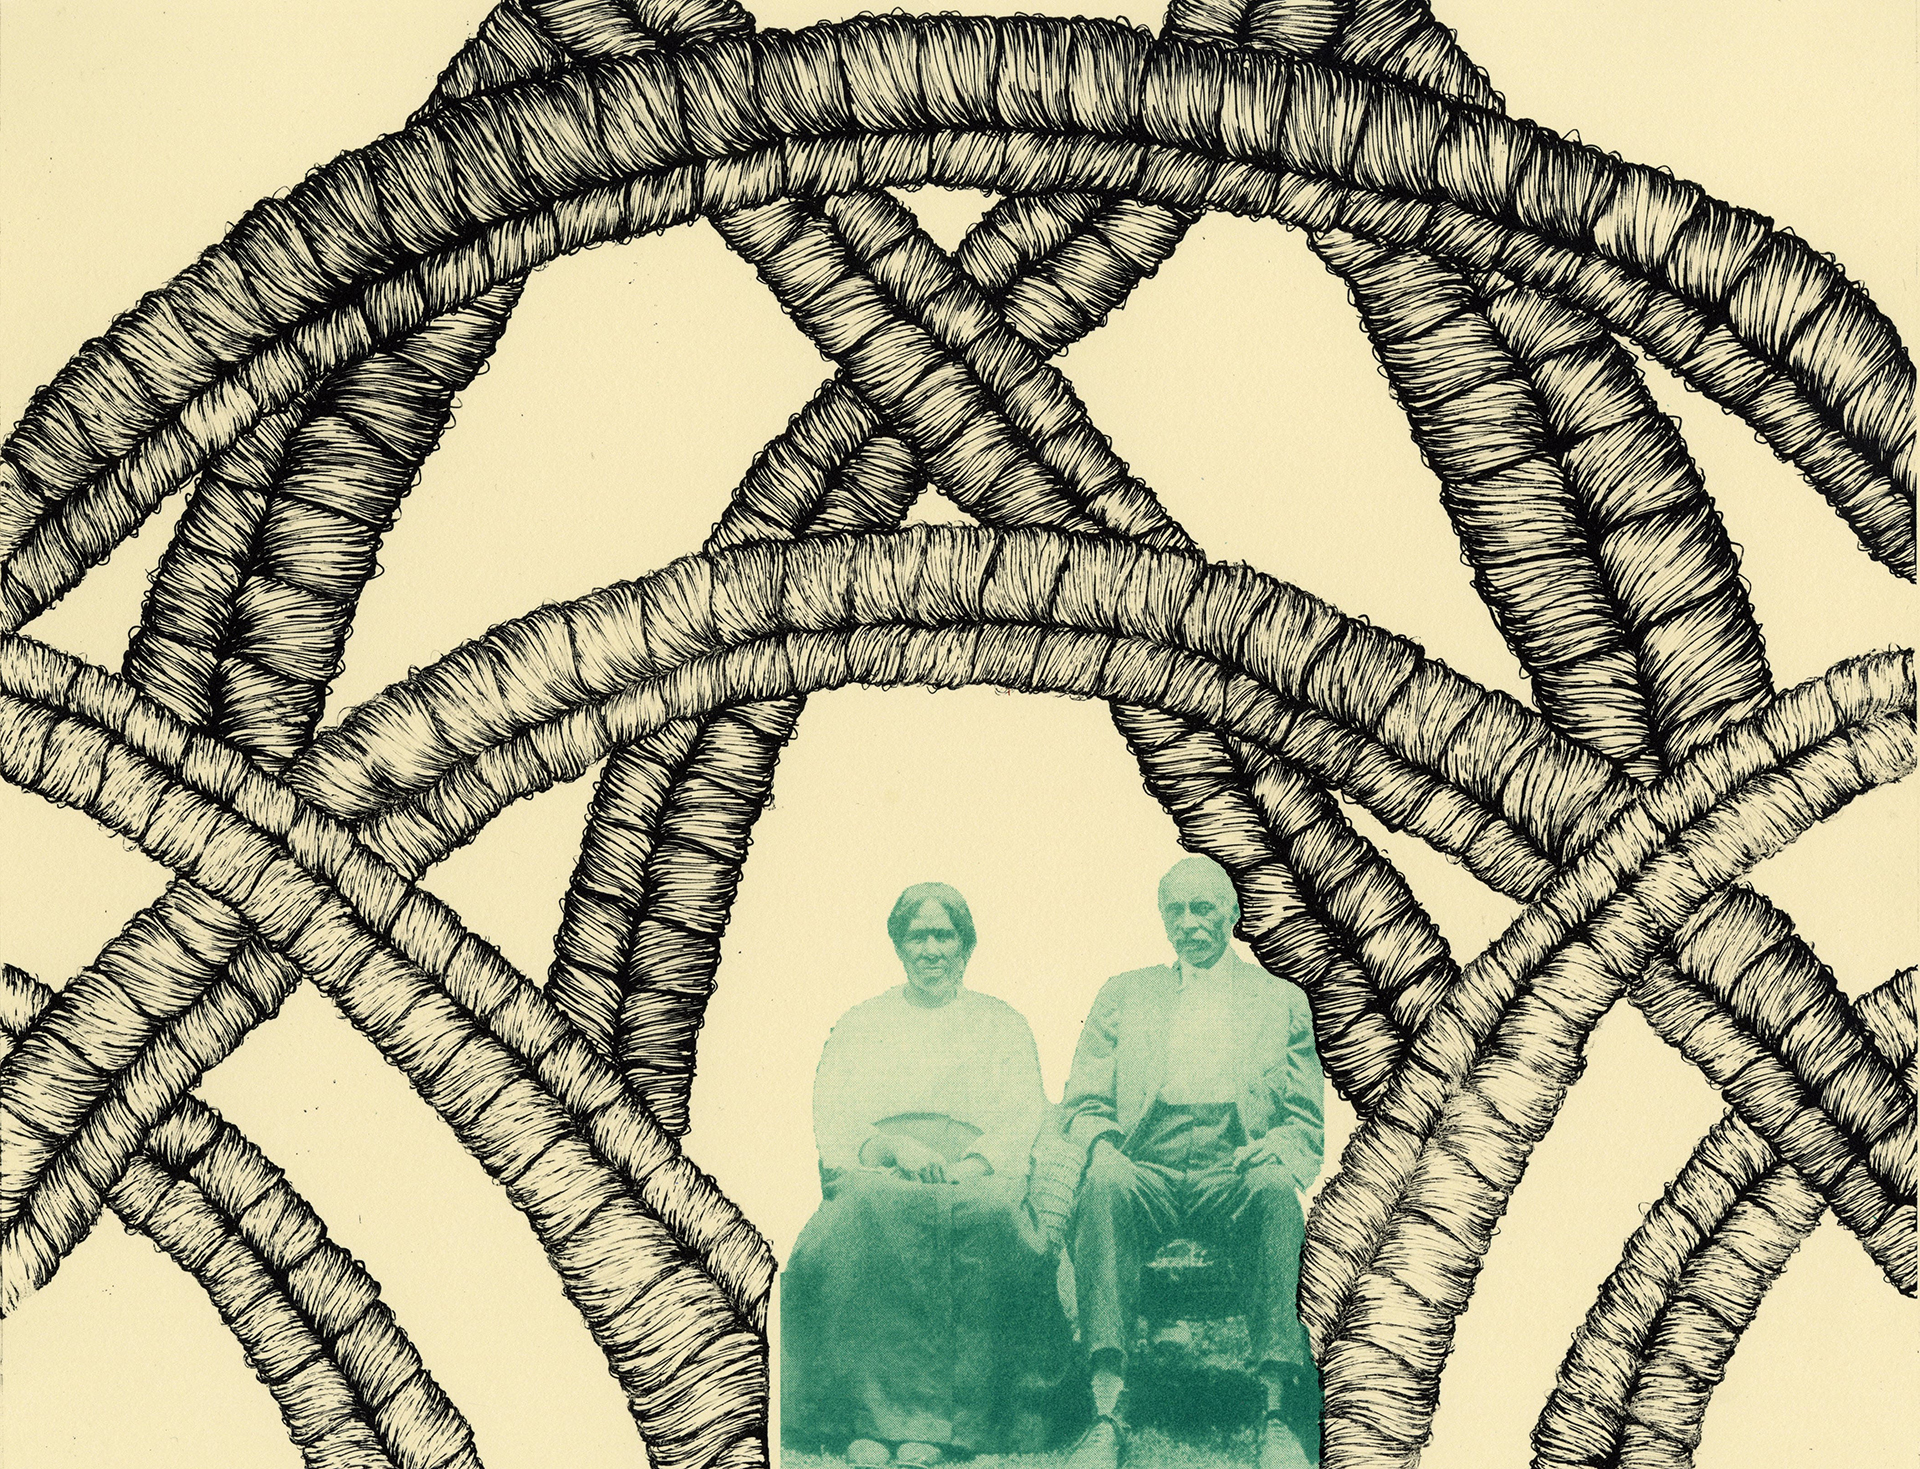 Image of an older couple sitting in the center of the pattern of braids